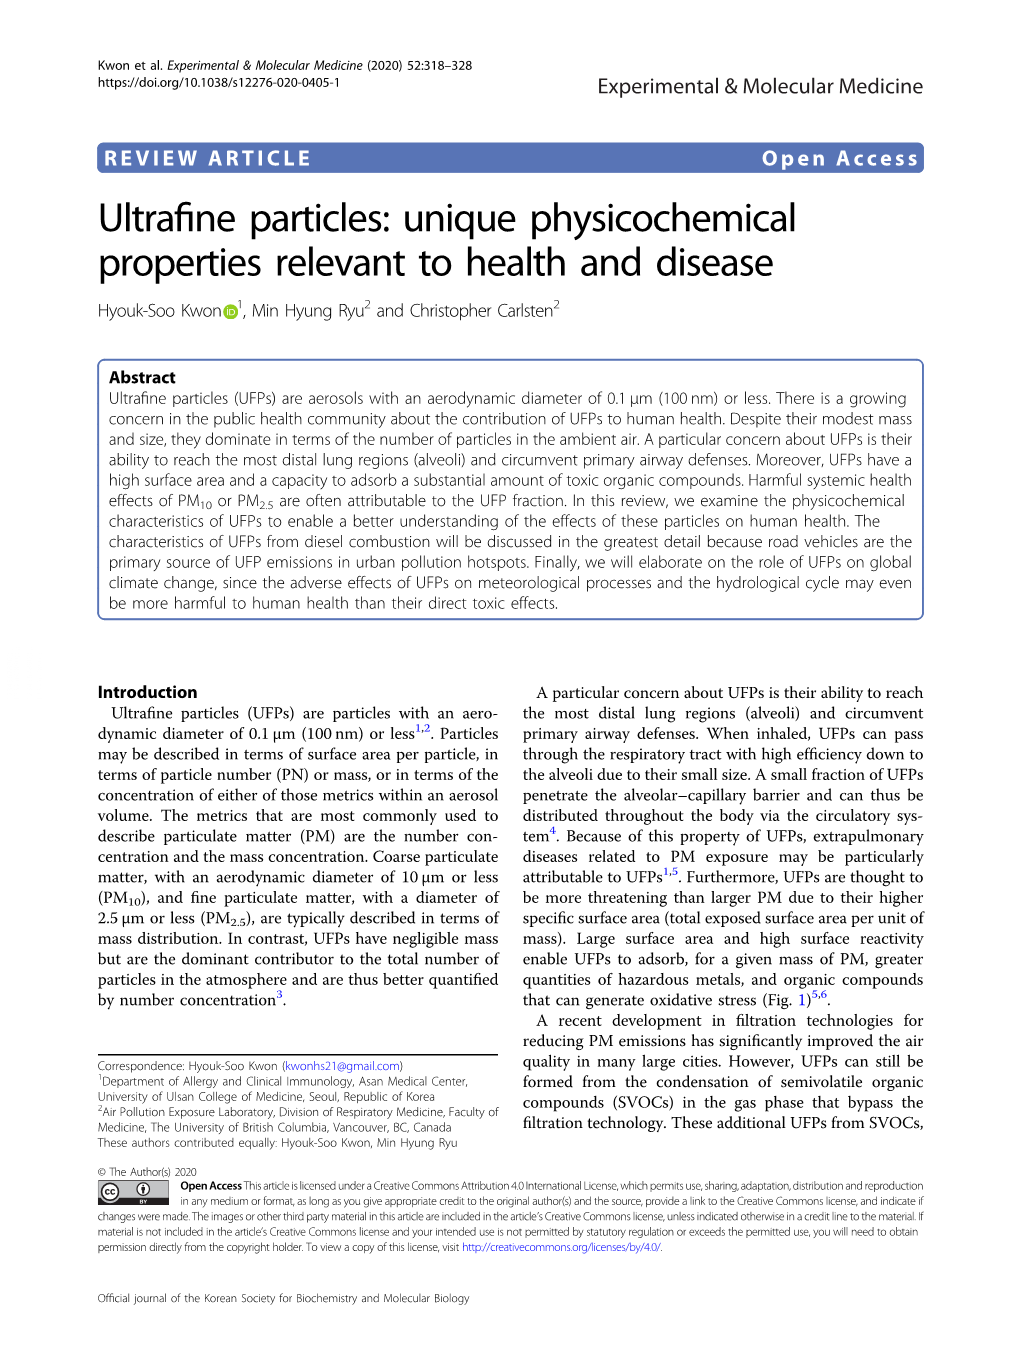 Ultrafine Particles: Unique Physicochemical Properties Relevant to Health and Disease